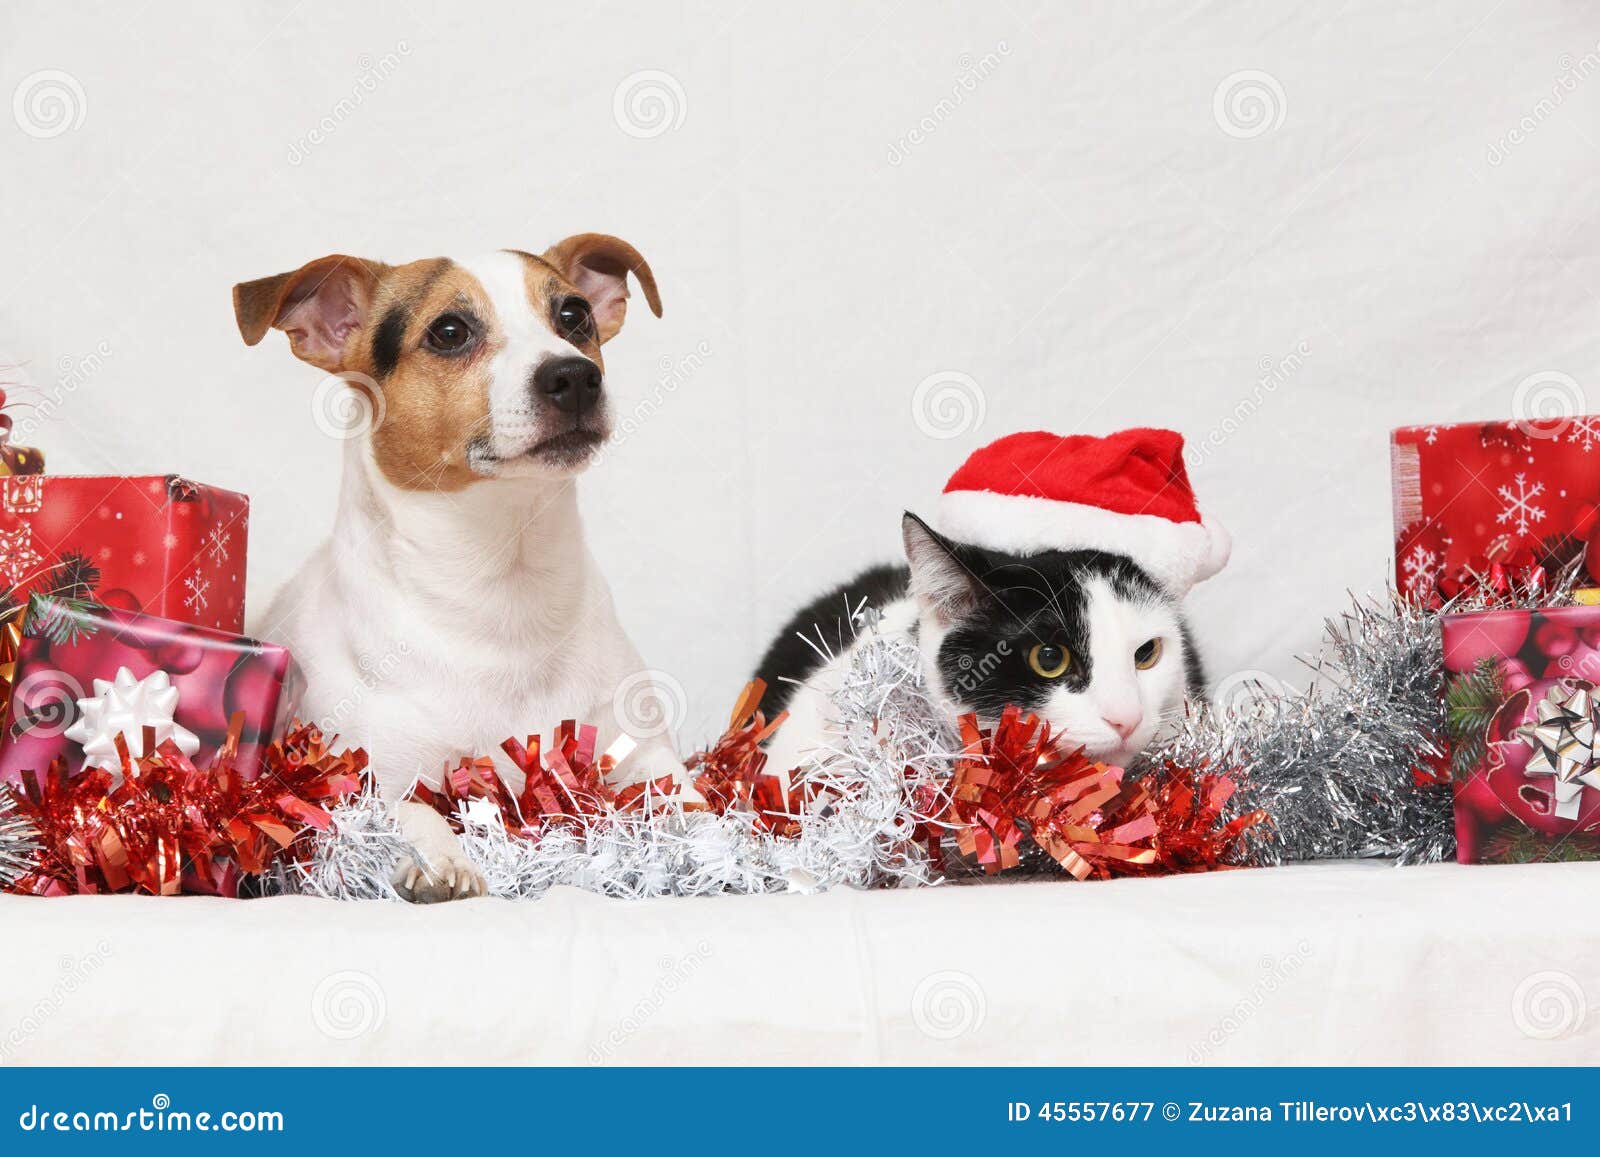 christmas jack rusell terrier with a cat